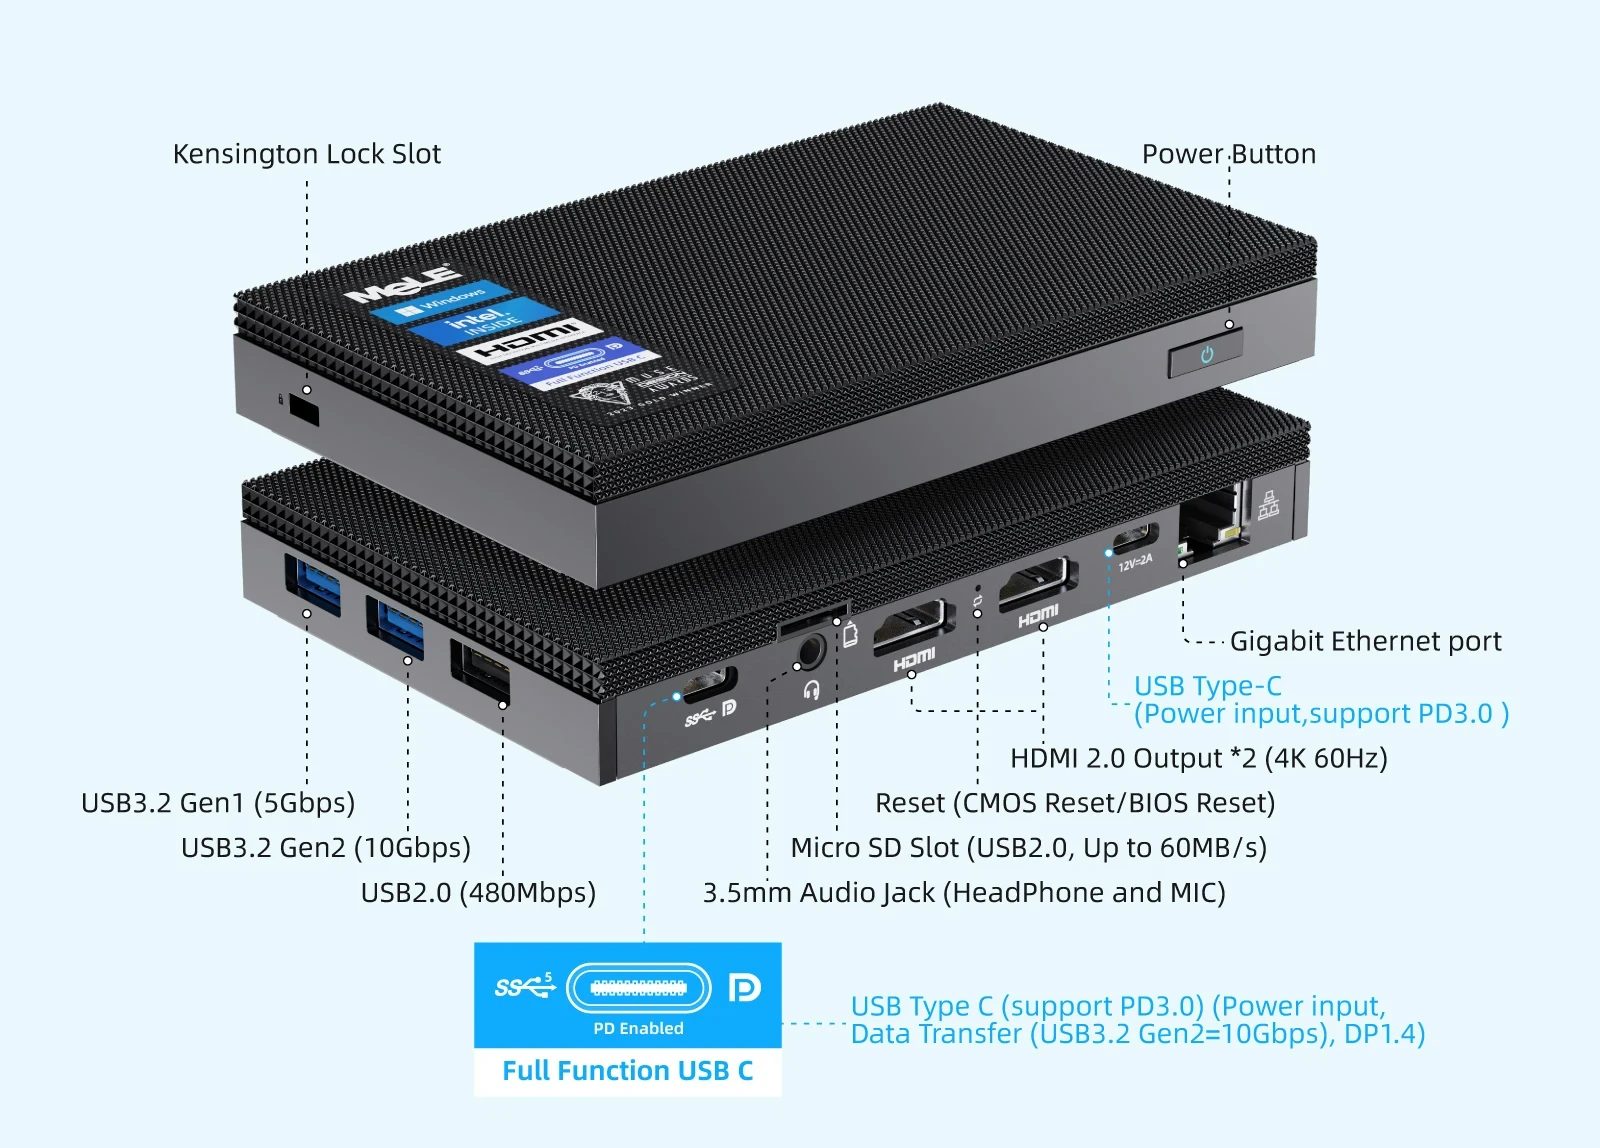 MeLE Quieter4C ultrathin fanless Intel N100 mini PC supports up to